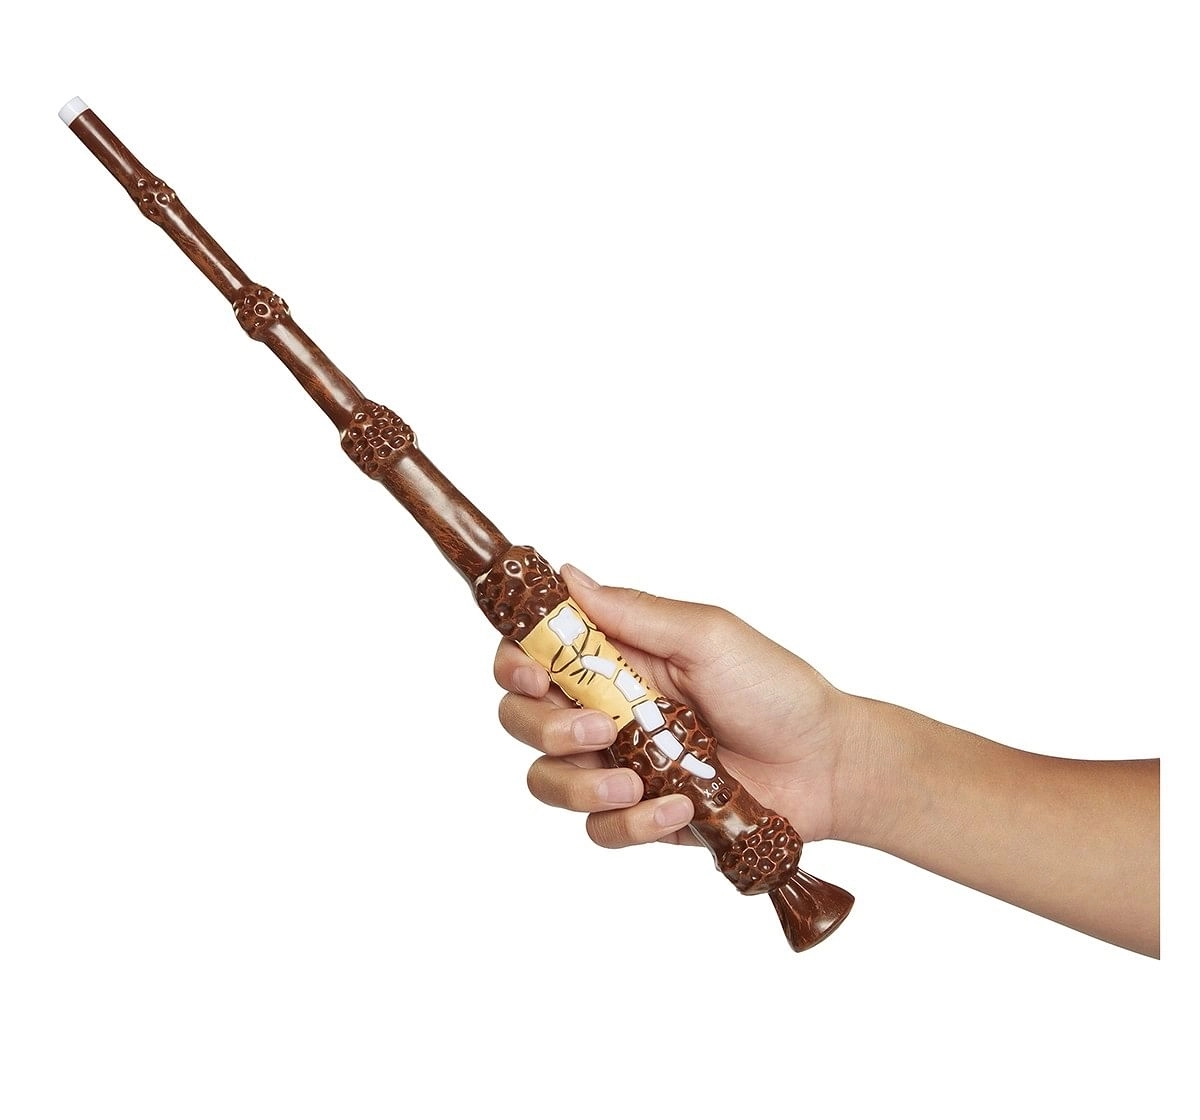 Harry Potter 's Wizard Training Wands